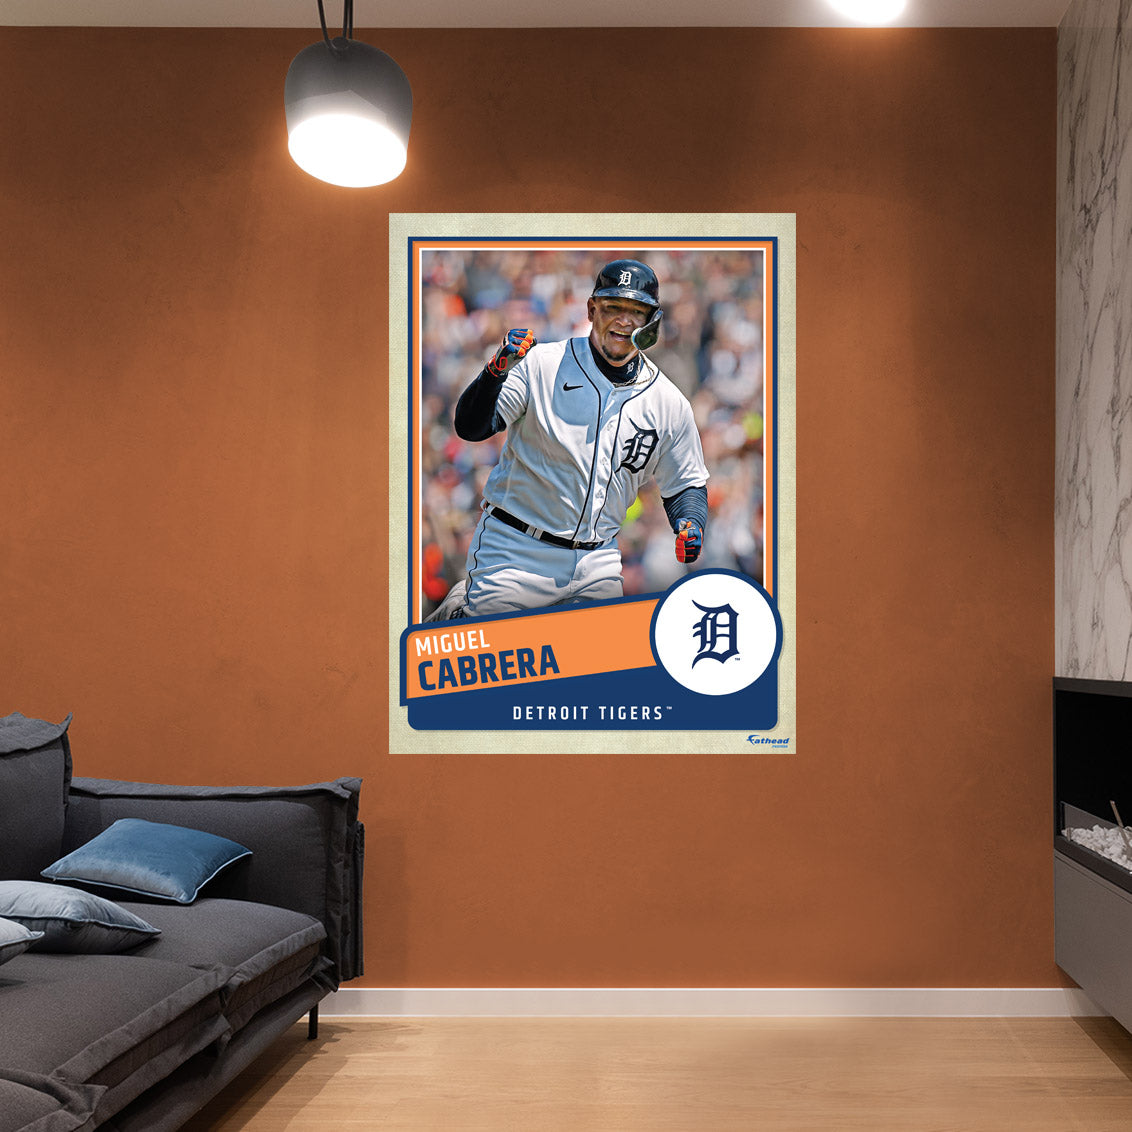 Detroit Tigers: Miguel Cabrera 2022 Poster - Officially Licensed